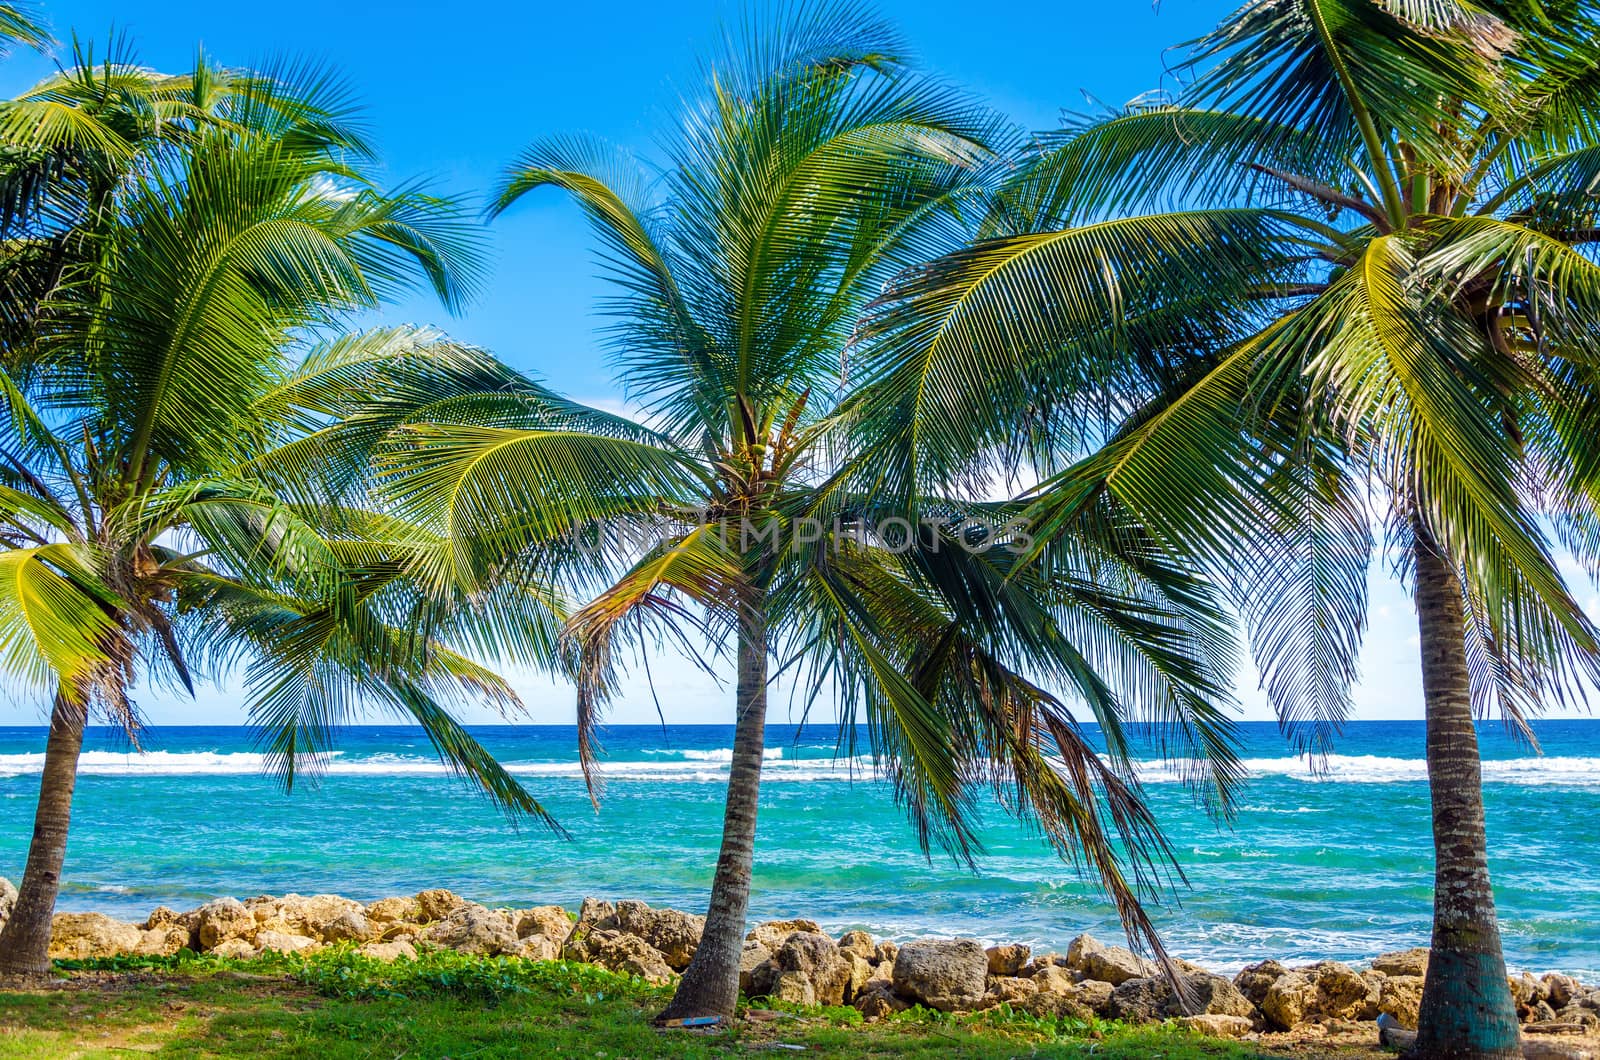 Palm Trees and Sea by jkraft5